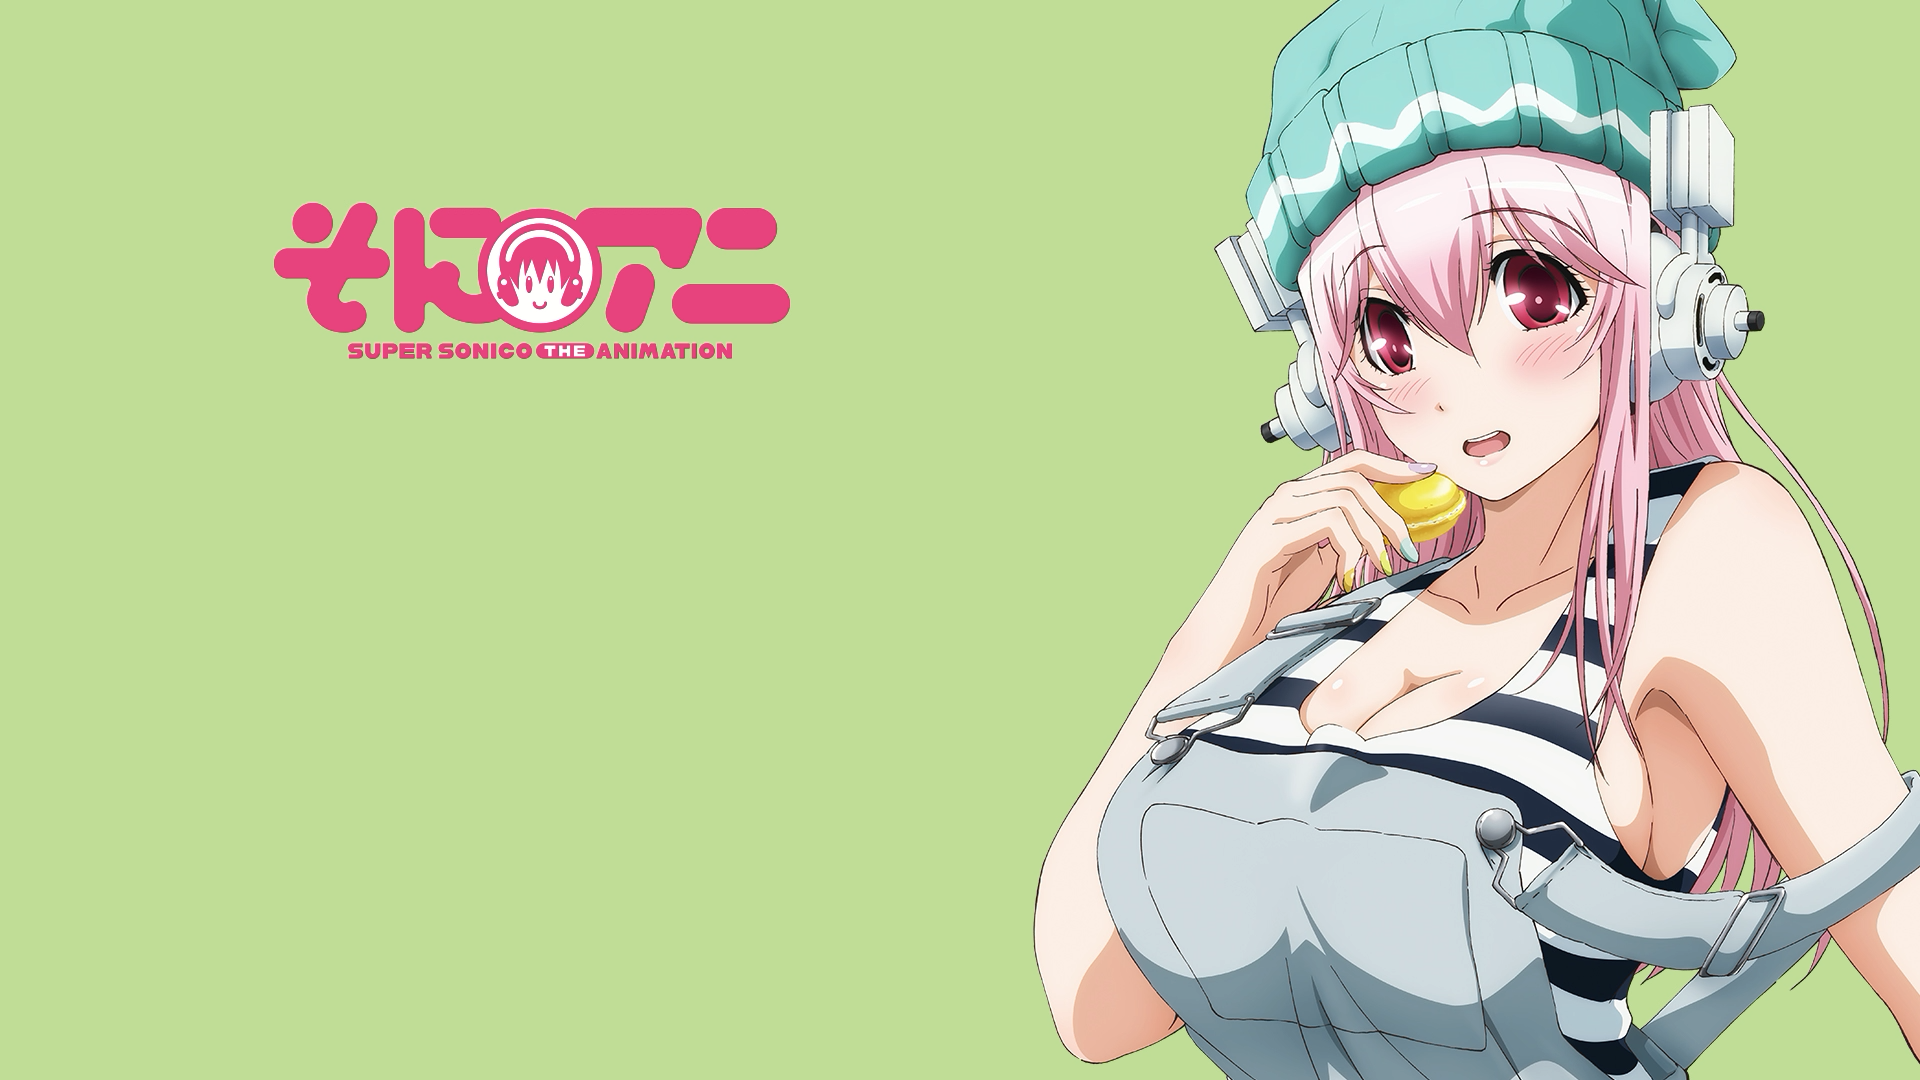 Super Sonico wallpapers for desktop download free Super Sonico pictures  and backgrounds for PC  moborg